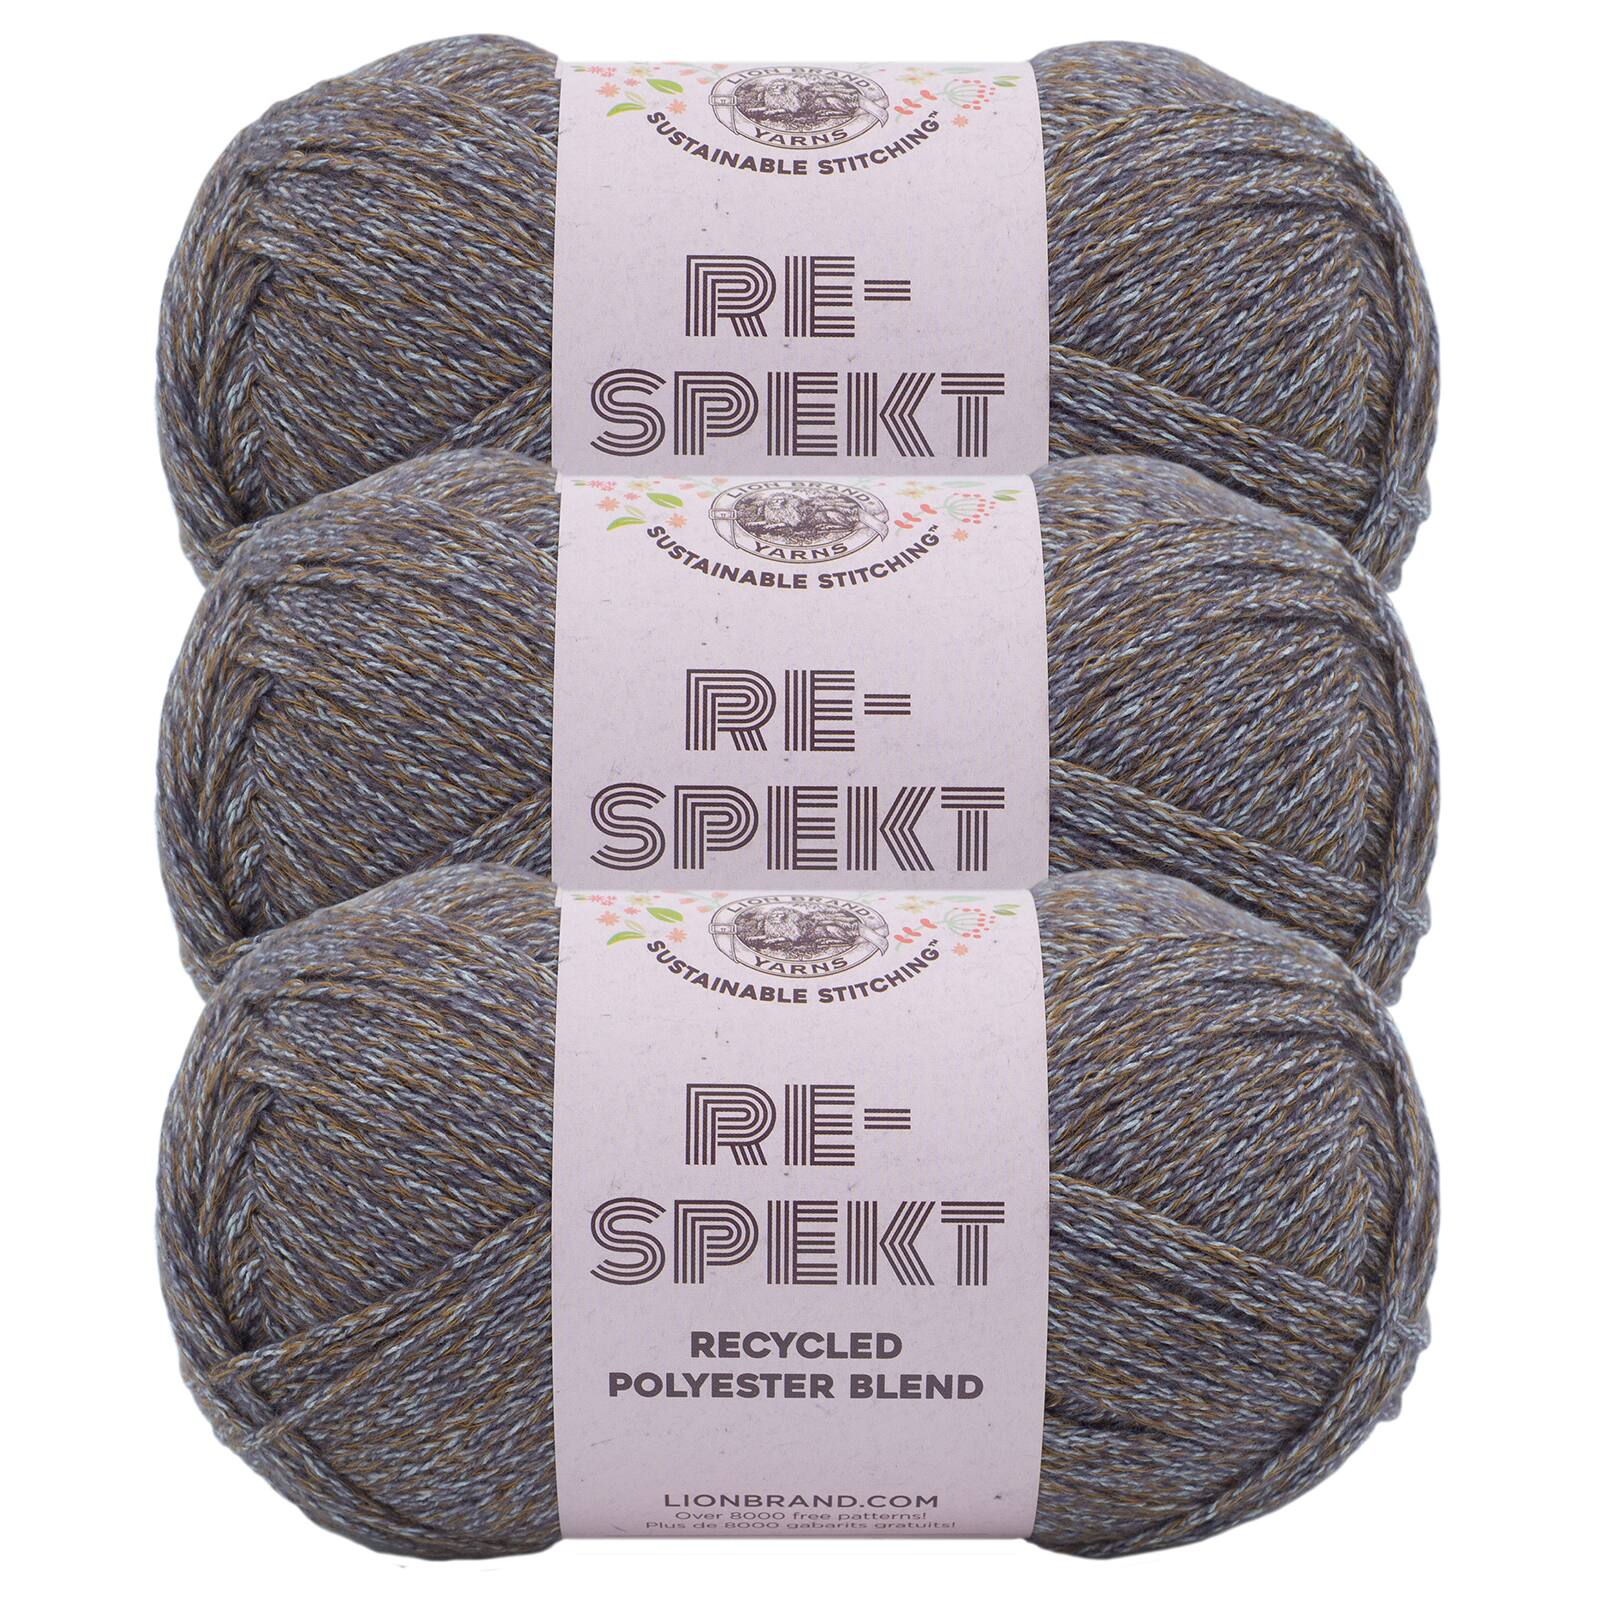 Store Brand Yarn Review: Michaels Edition! 